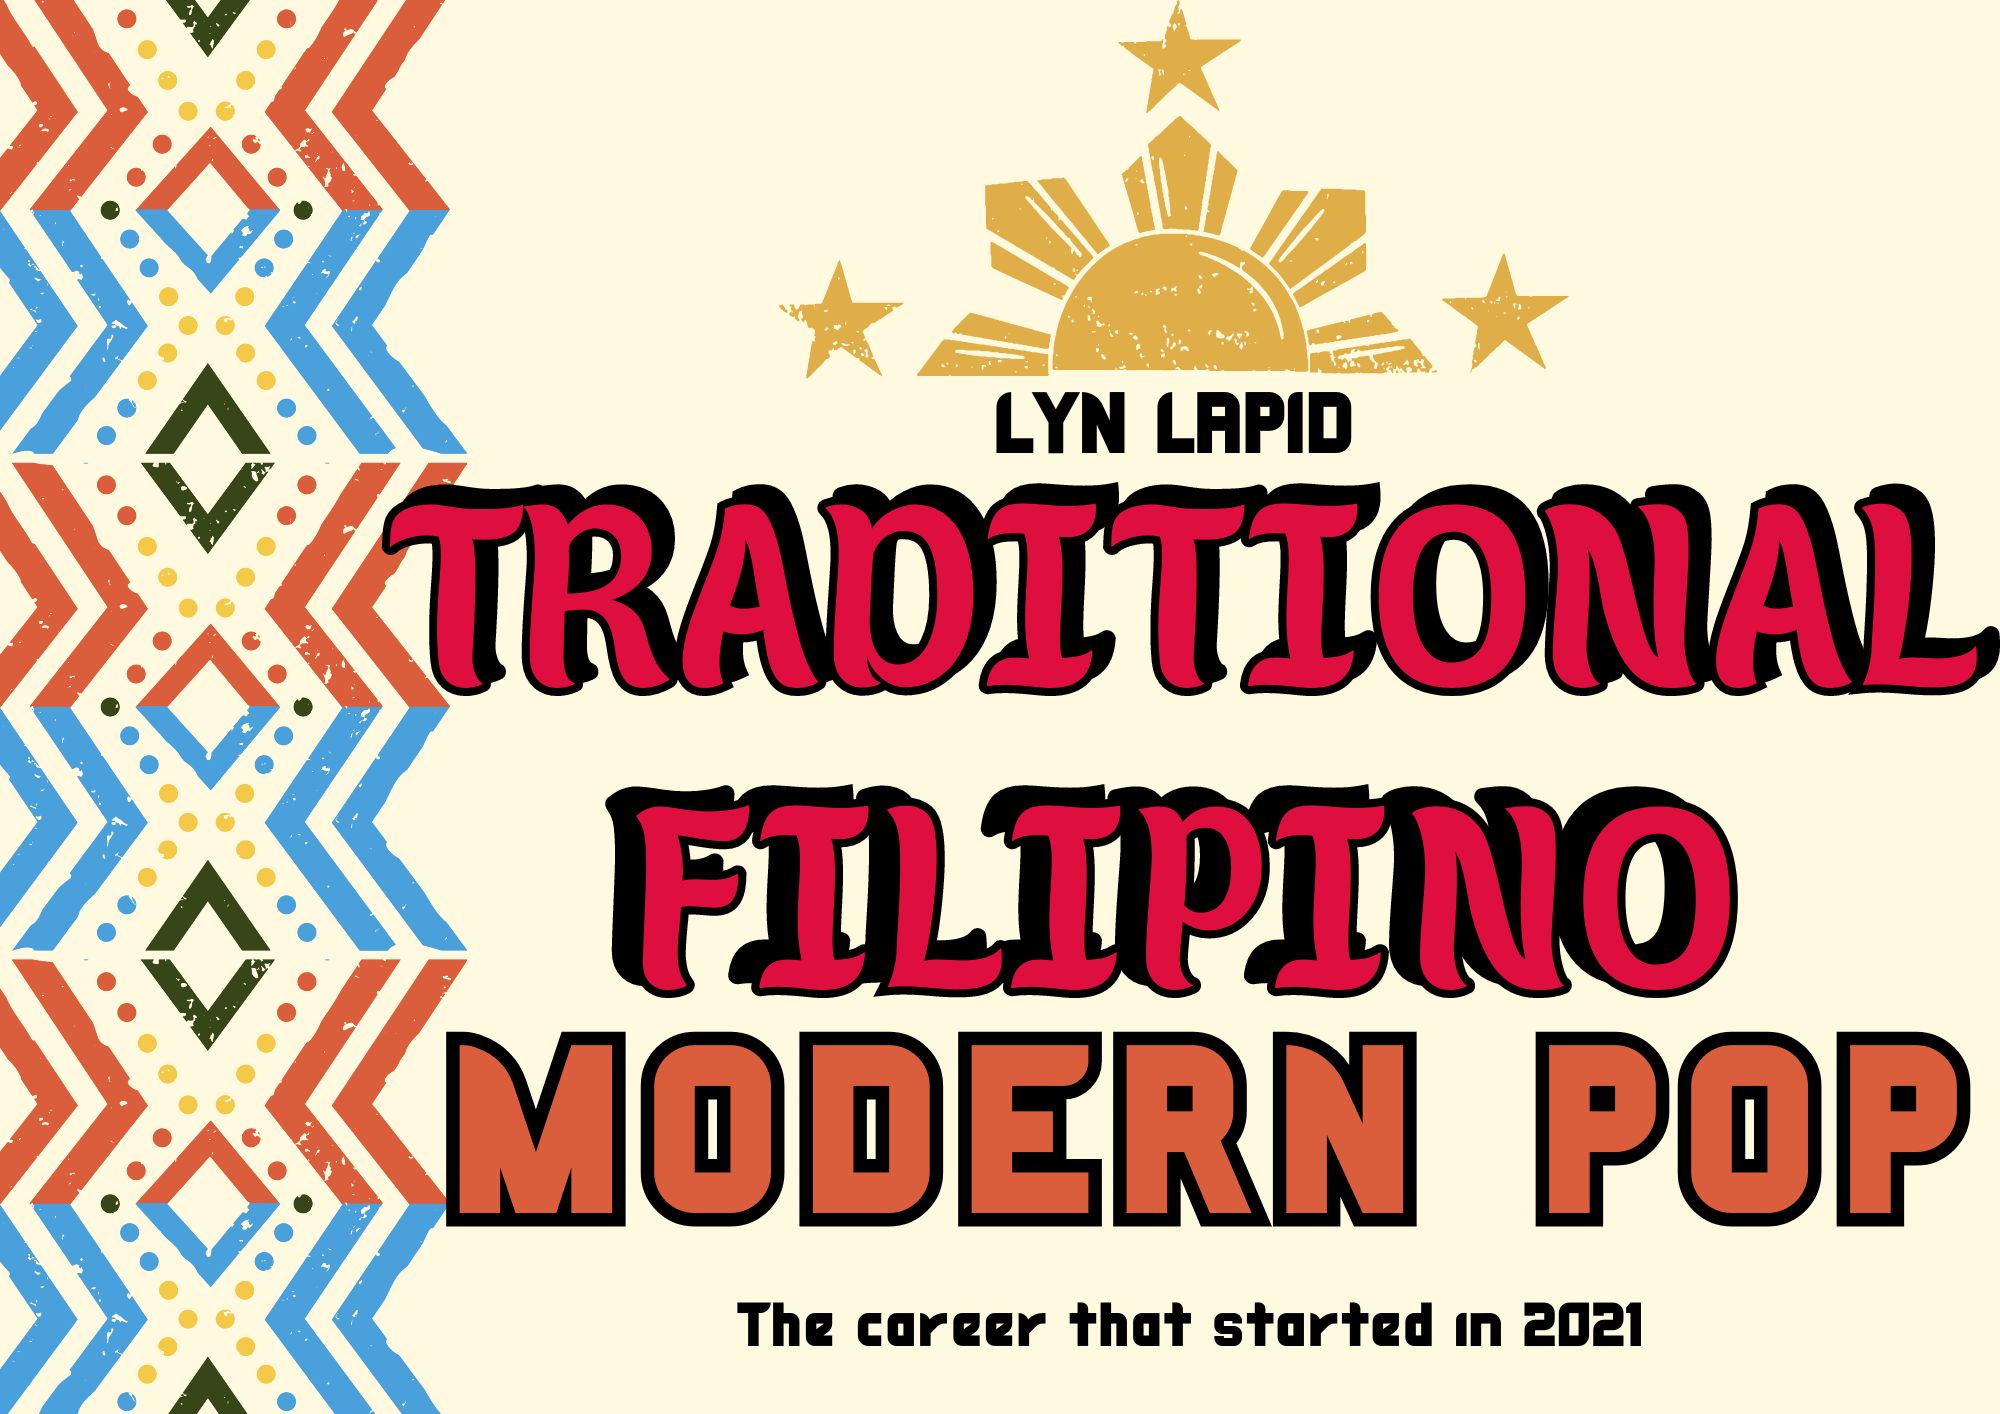 Lyn Lapid is an artist who appeared in 2020. She uses mixed genres of traditional Filipino and modern pop.